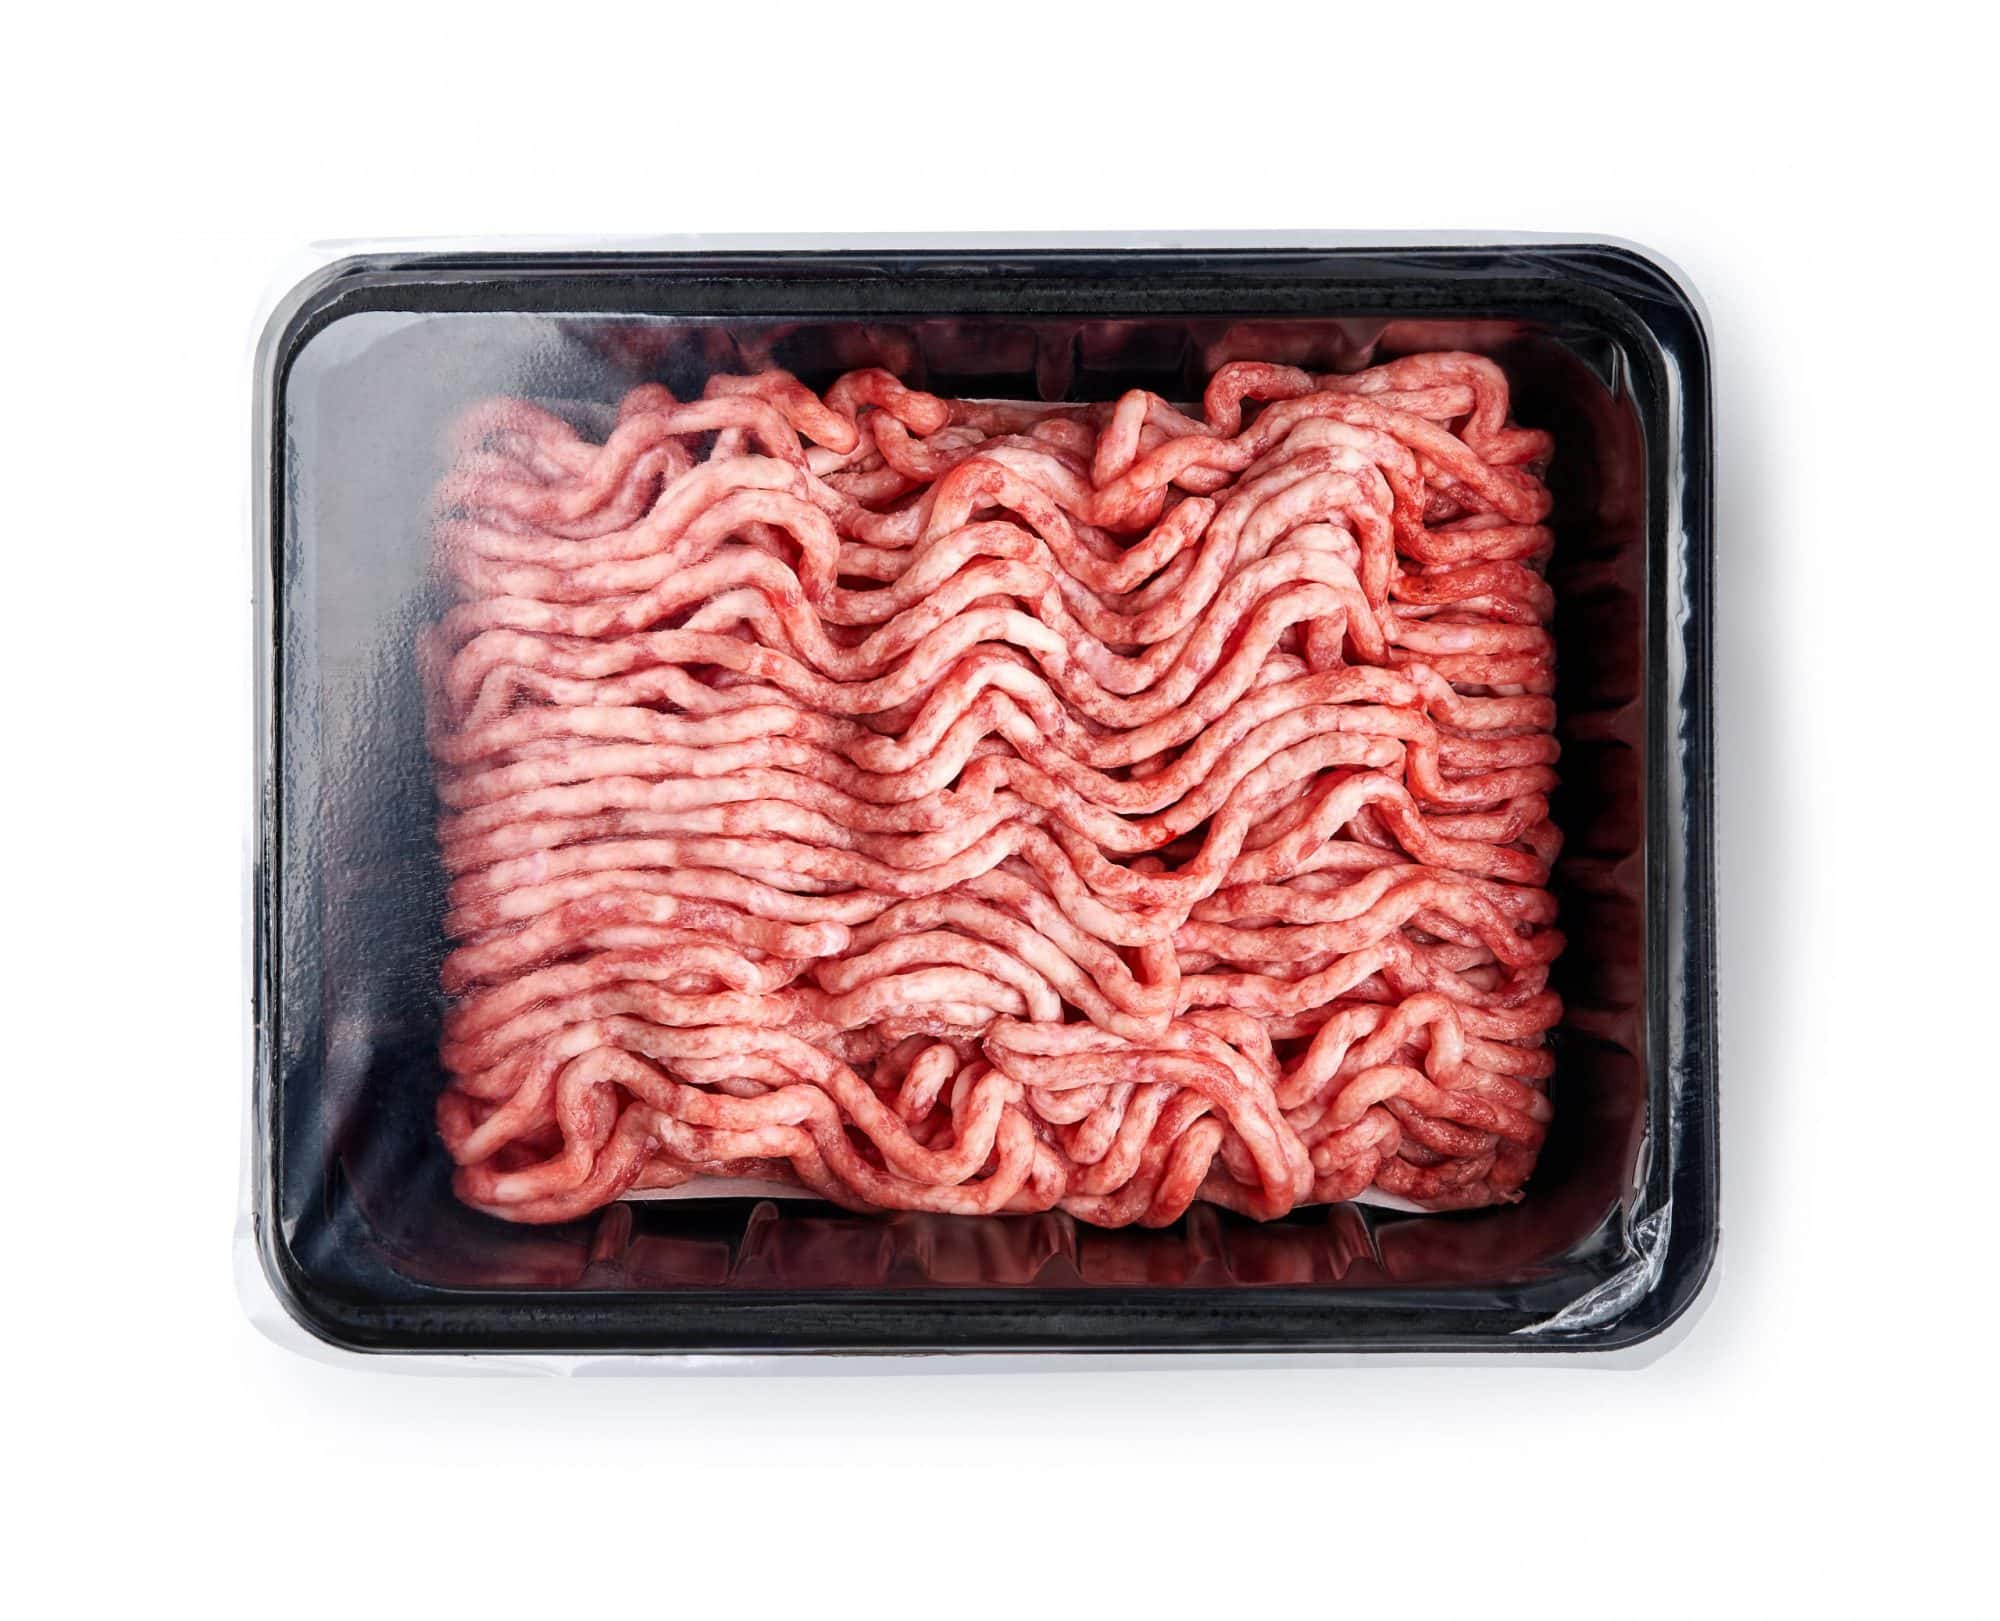 Plastic tray with raw fresh pork minced meat on white background. Packaging design for mock up.